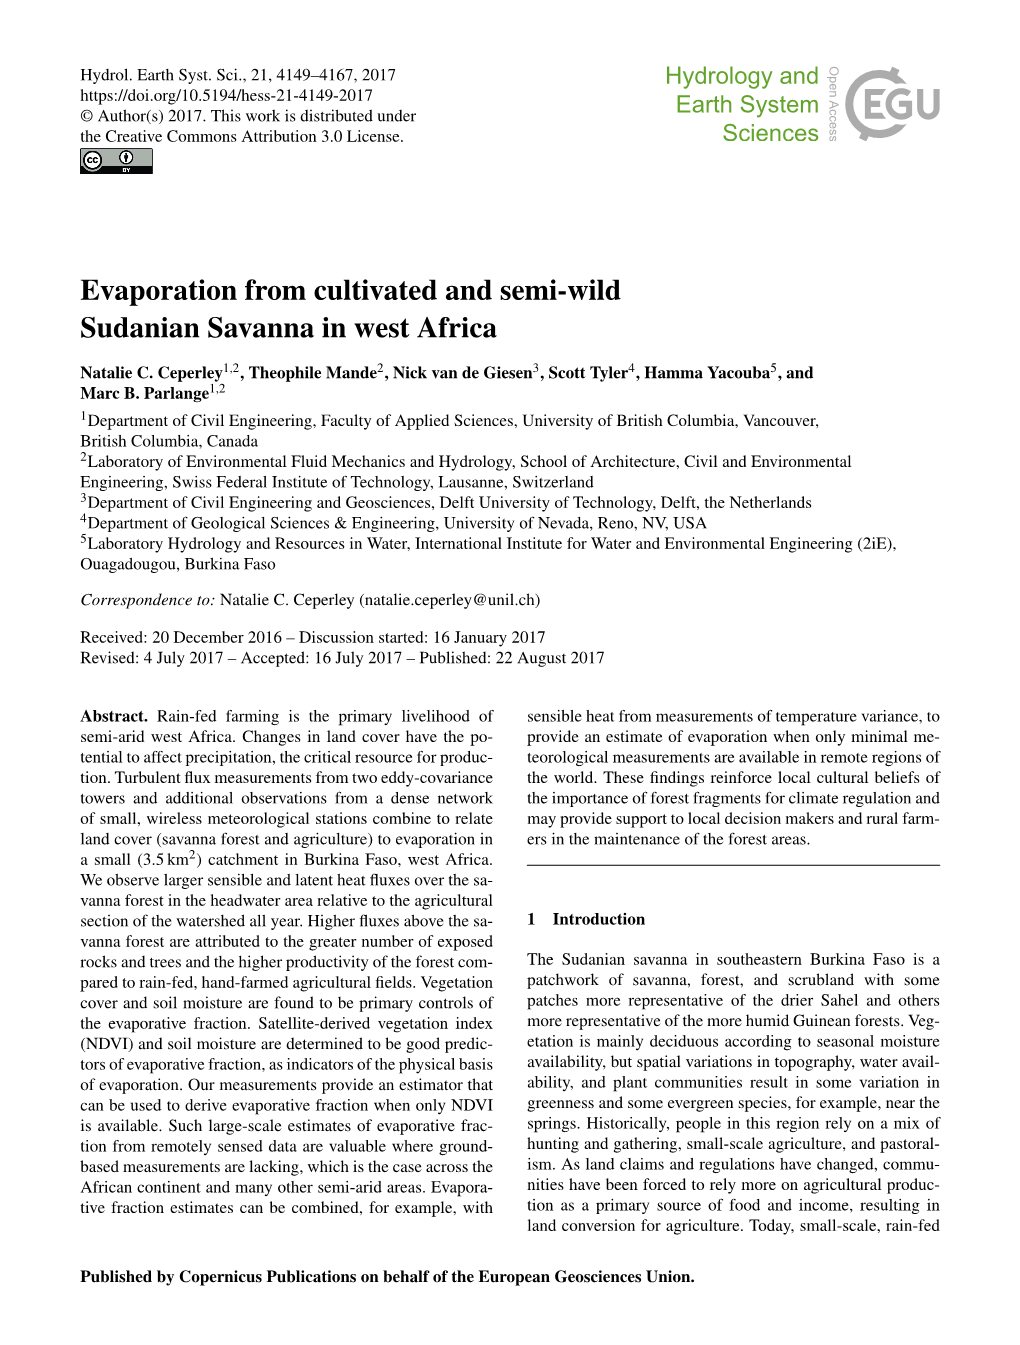 Evaporation from Cultivated and Semi-Wild Sudanian Savanna in West Africa